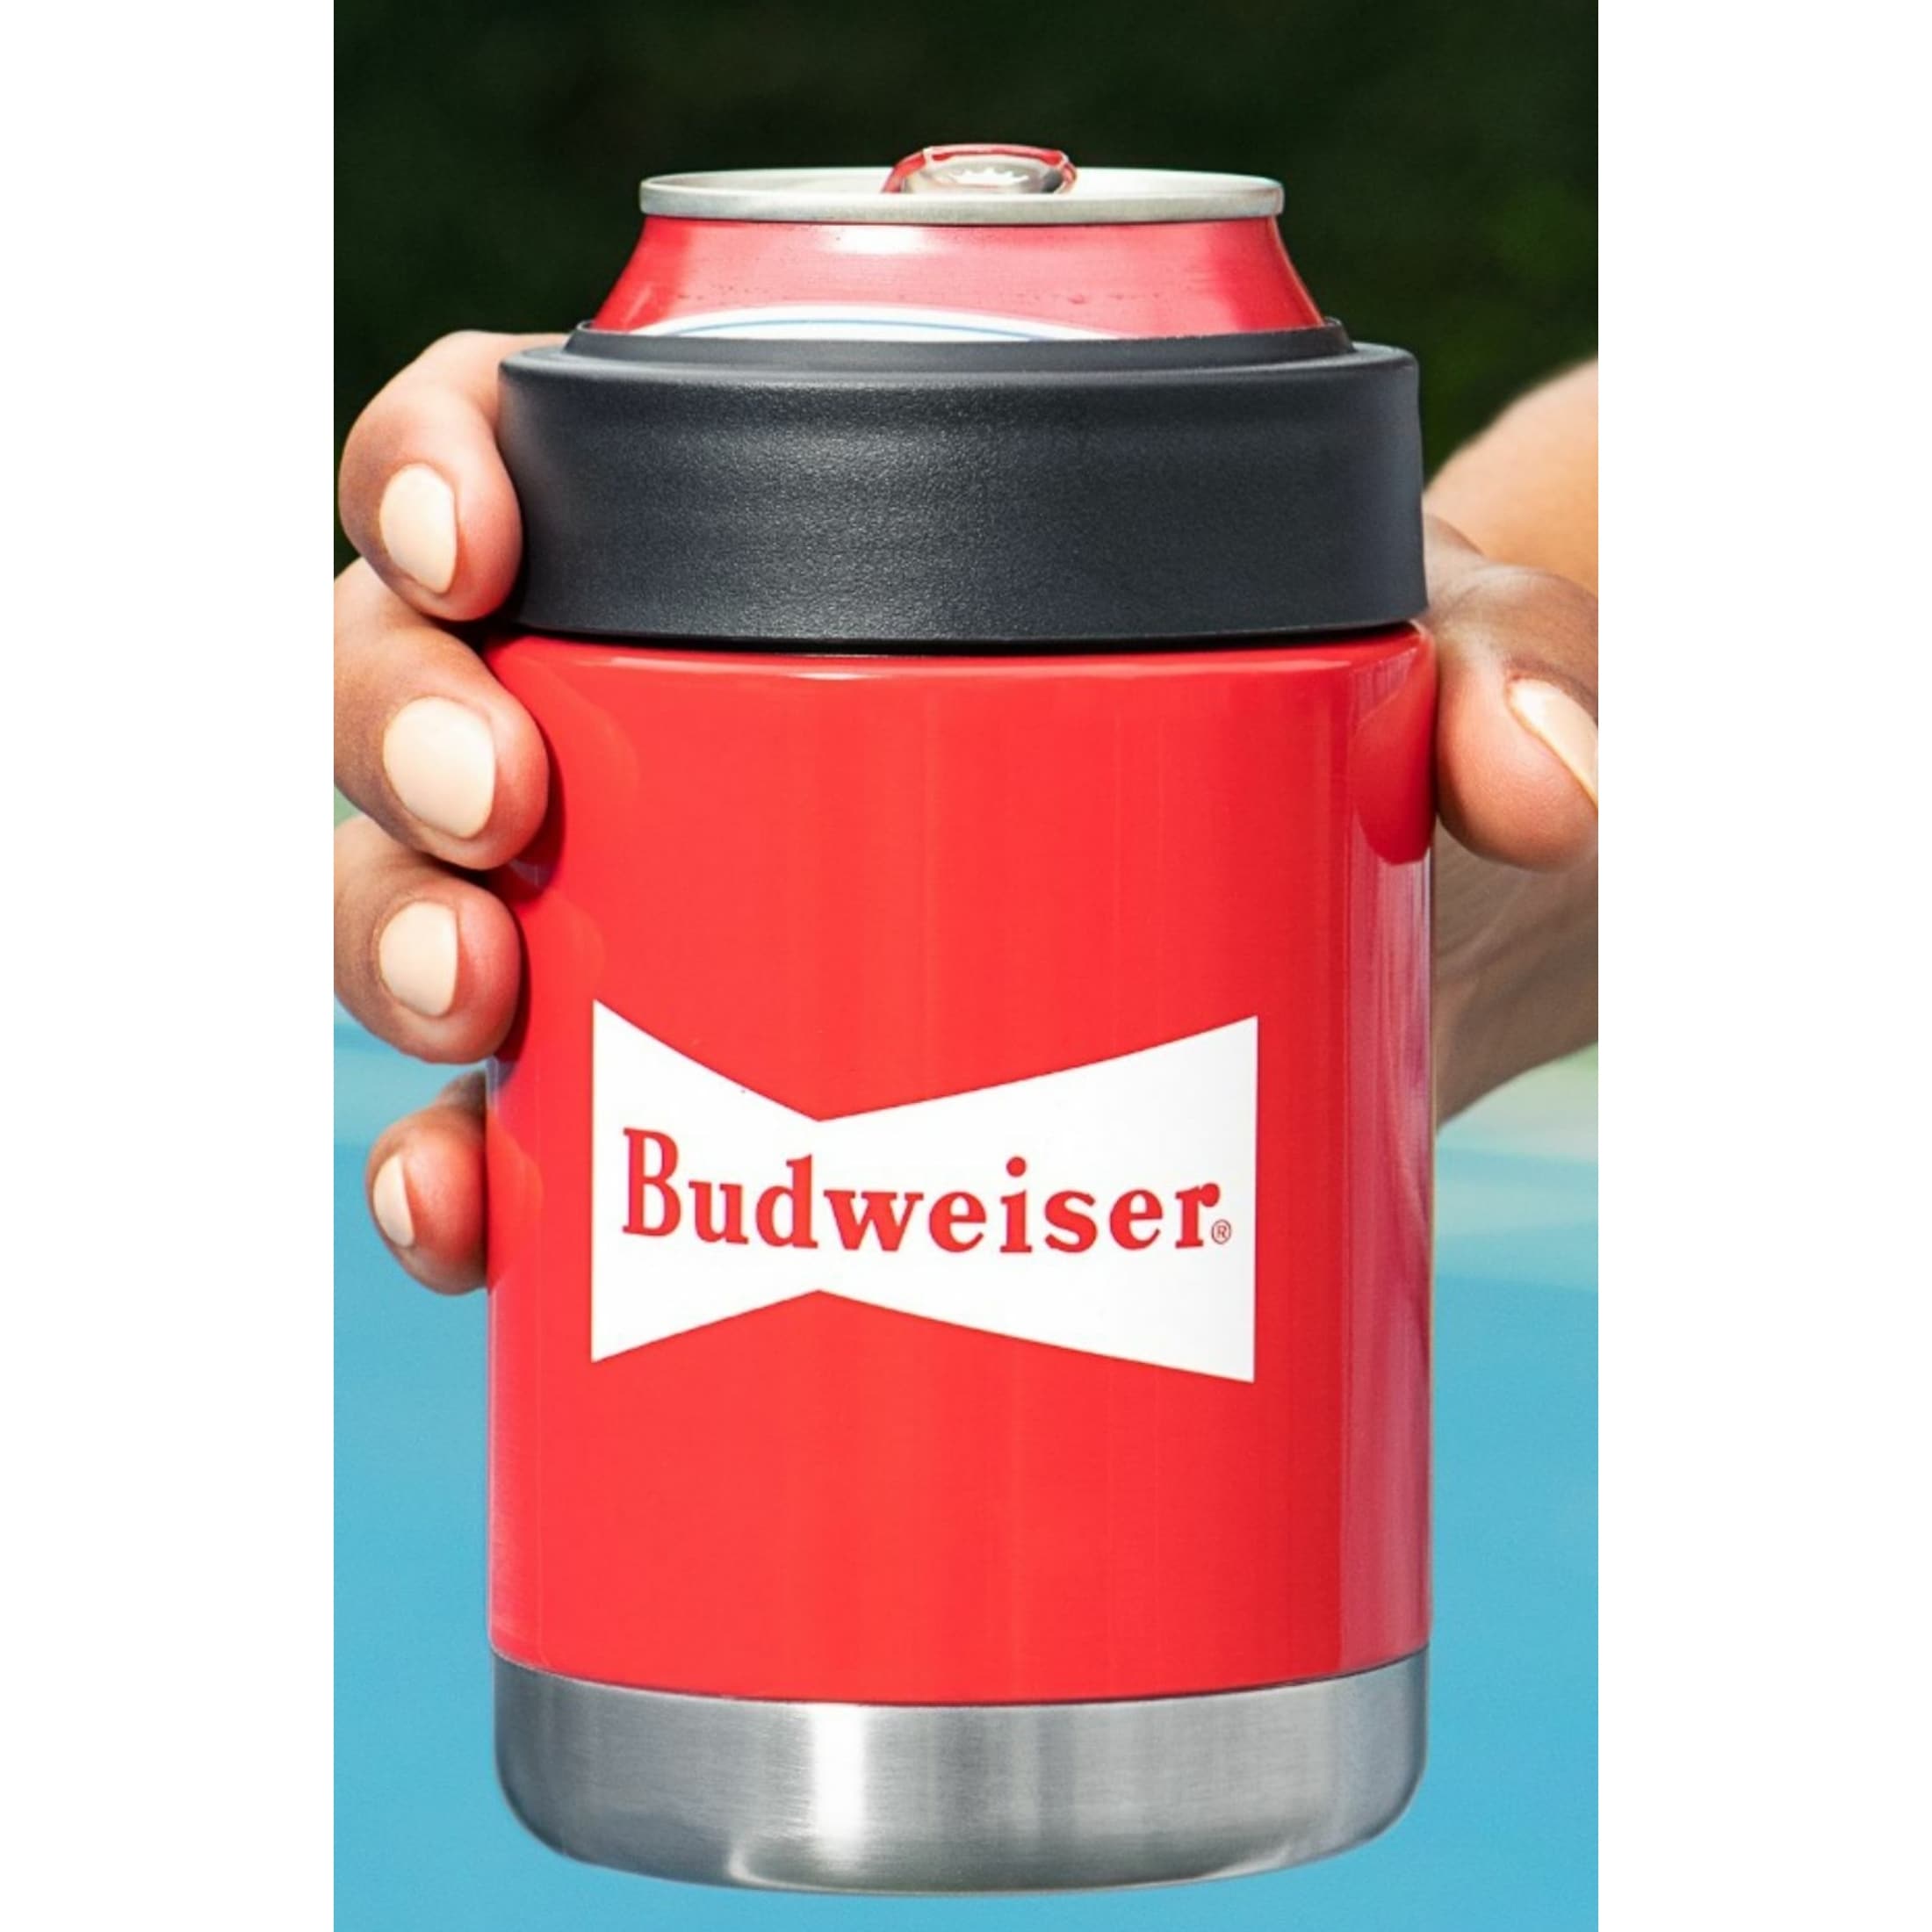 https://ak1.ostkcdn.com/images/products/is/images/direct/6d494172d7565f65f387e2dabde3ed5897e08168/Budweiser-Stainless-Steel-Insulated-Beverage-holder---Red.jpg